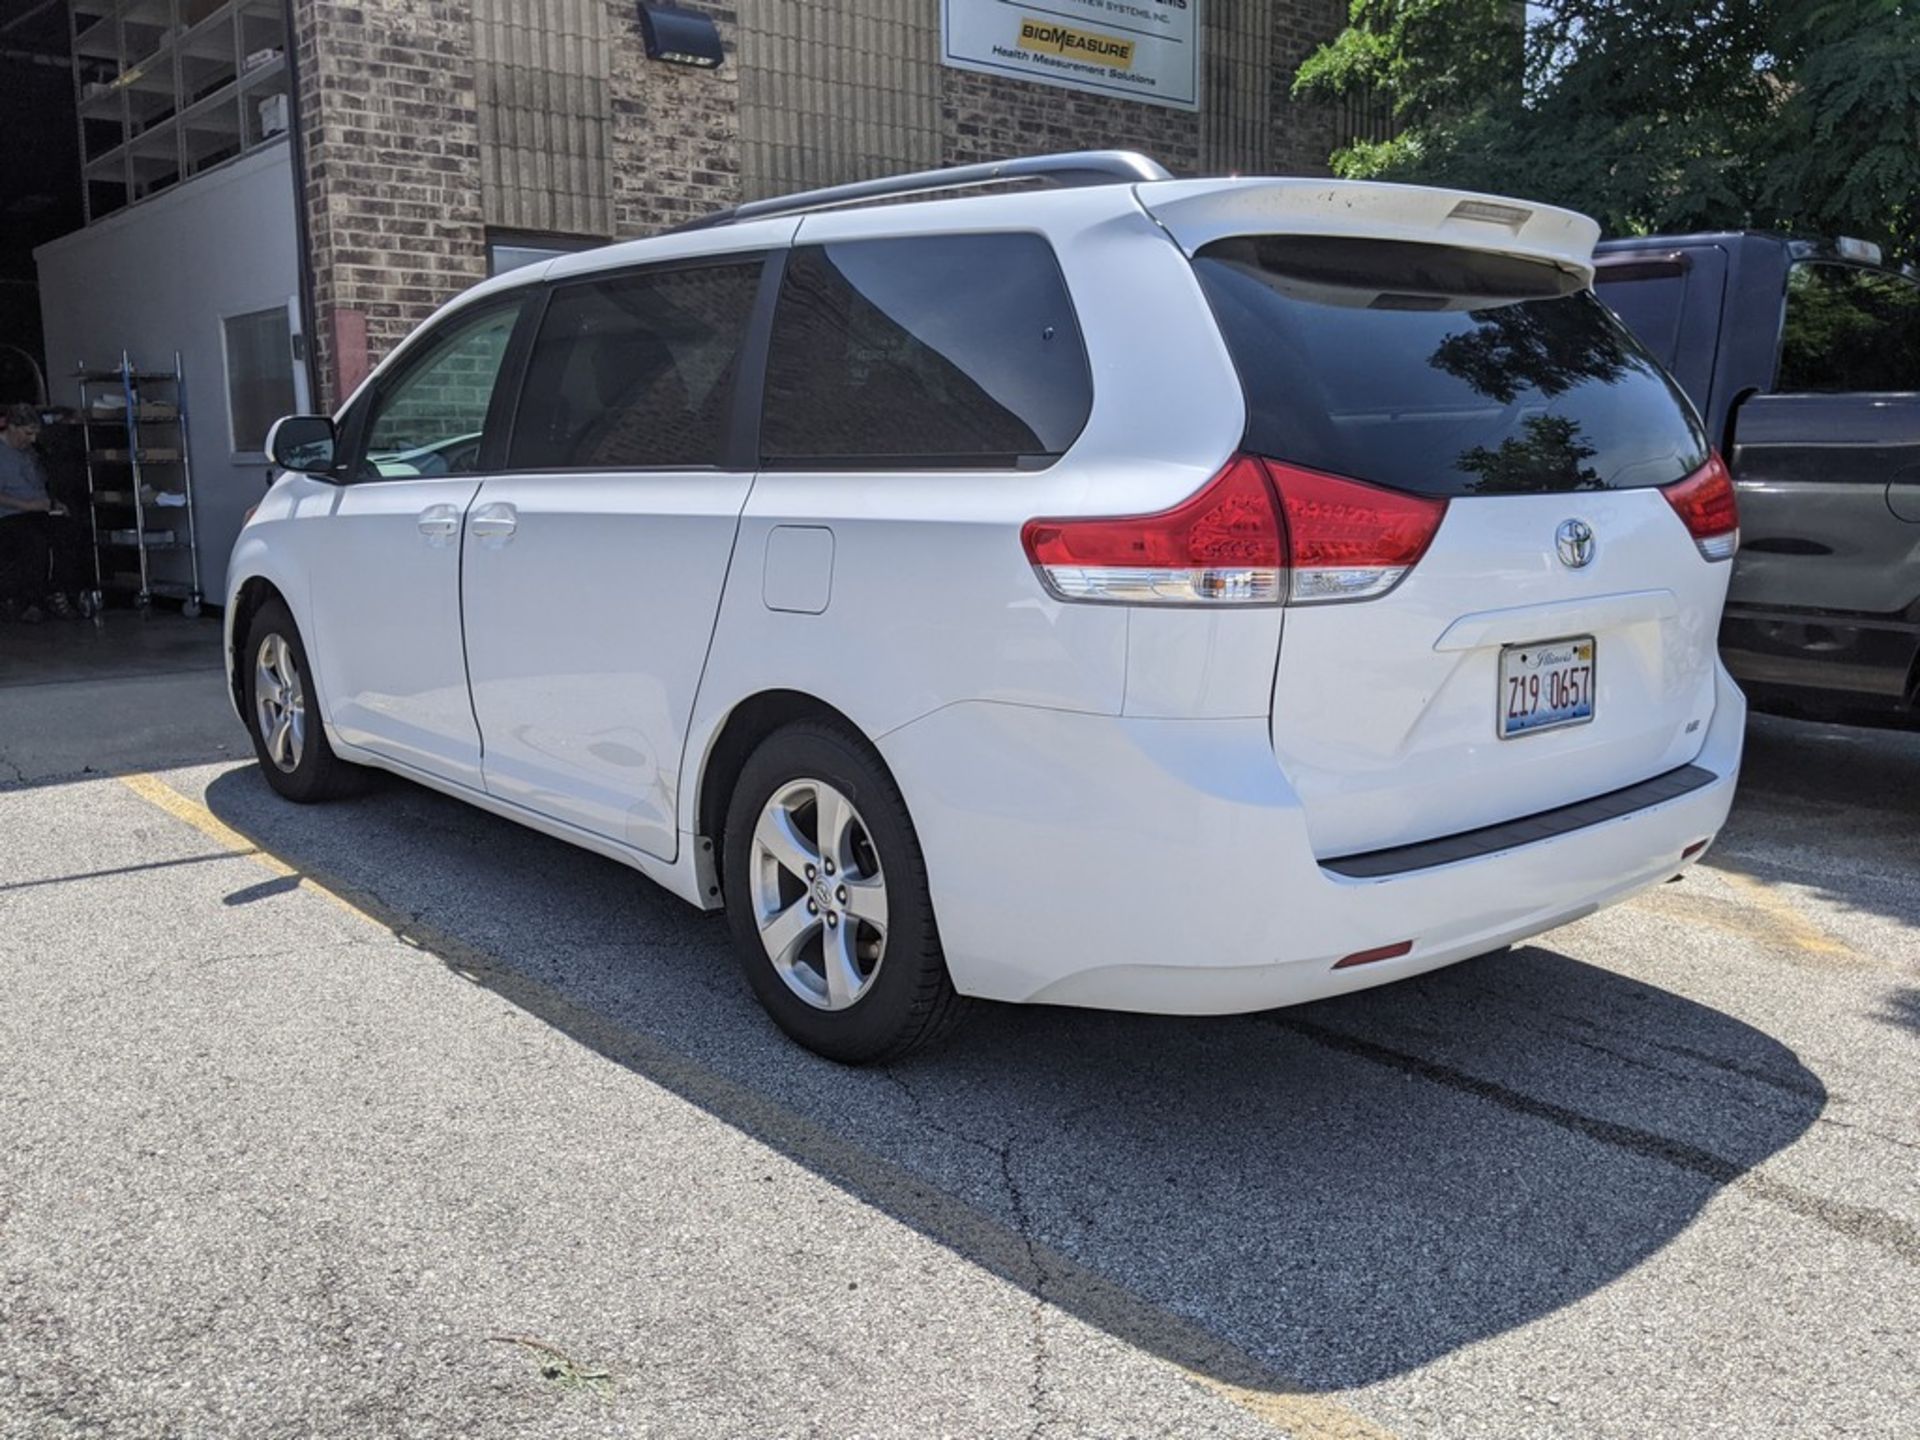 2014 TOYOTA MODEL SIENNA LE VAN, VIN: 5TDKK3DCXES482912, AUTOMATIC TRANSMISSION, APPROX. 240,000 - Image 3 of 14